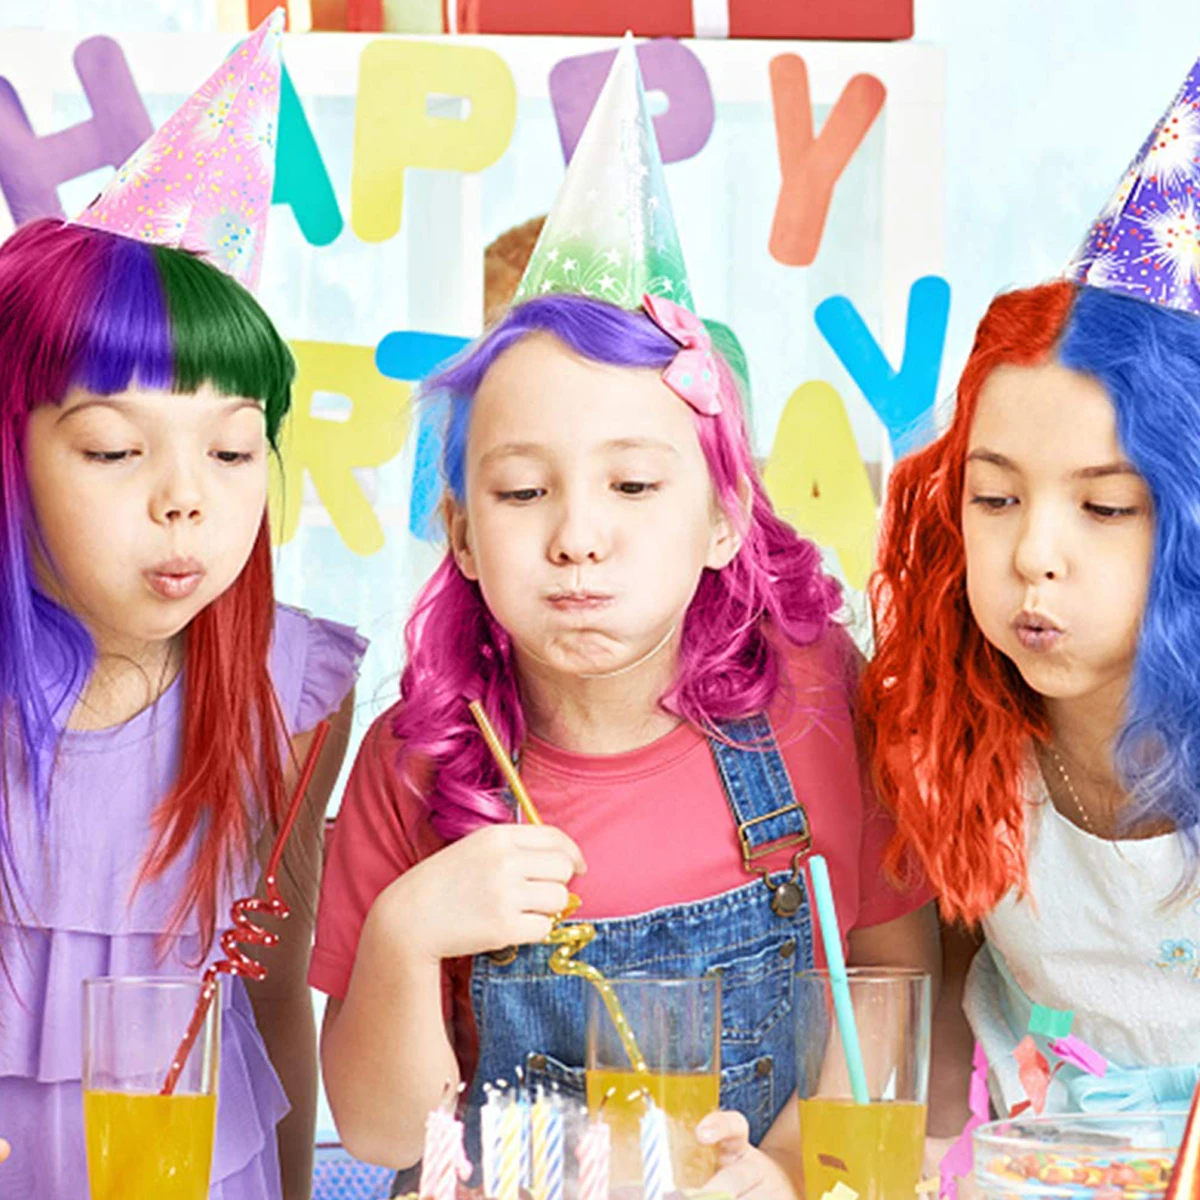 4 Colors Bright Temporary Hair Dye Powder Cake Washable DIY Coloring Cream  Chalk Set for Adult Kids Festival Party Accessories - AliExpress